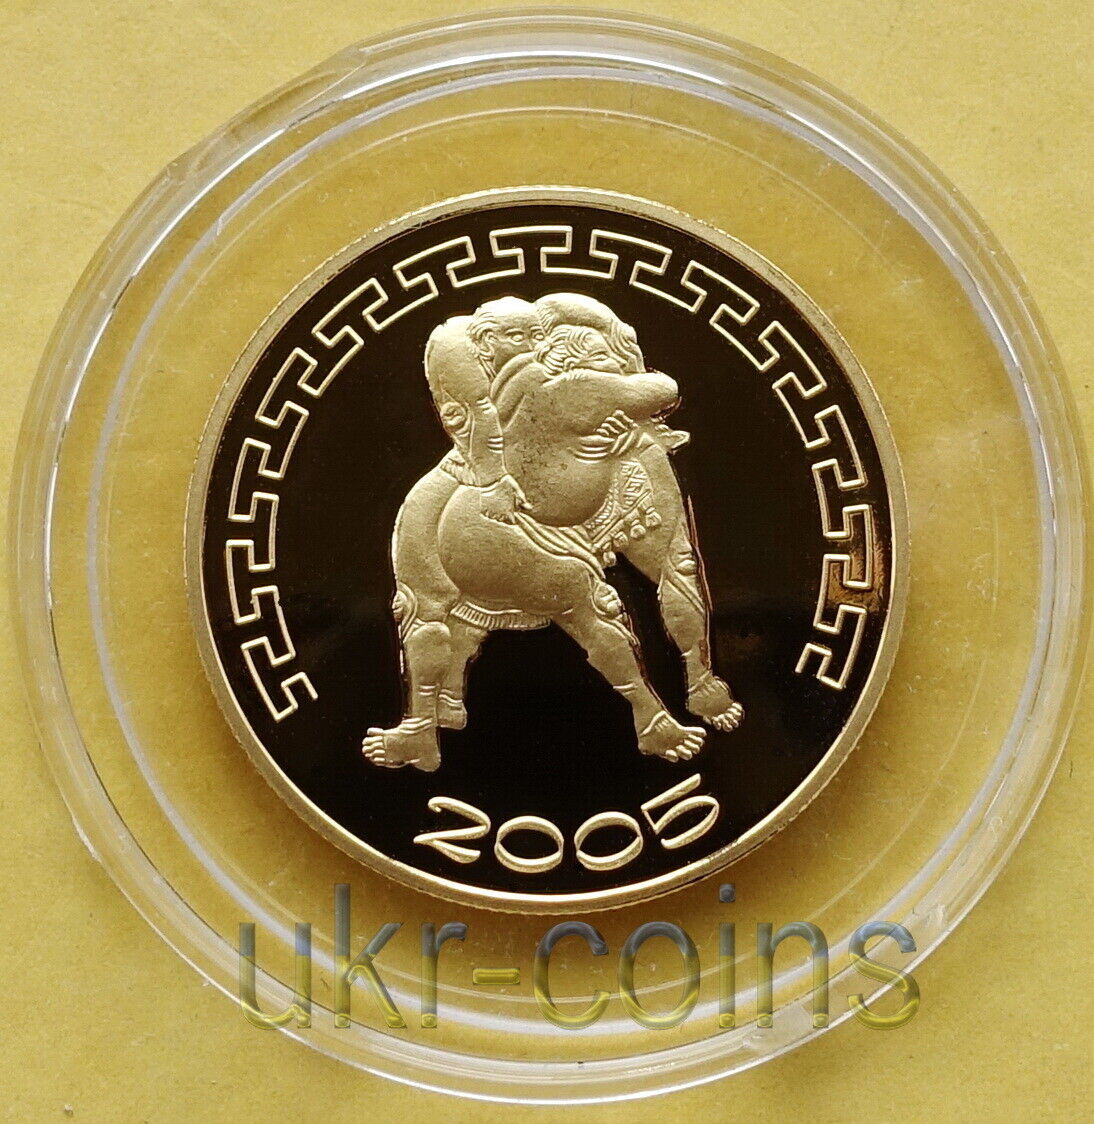 2005 Mongolia Sumo Wrestling 1/2 Oz Gold Proof Coin Japan Sports 10000 Togrog